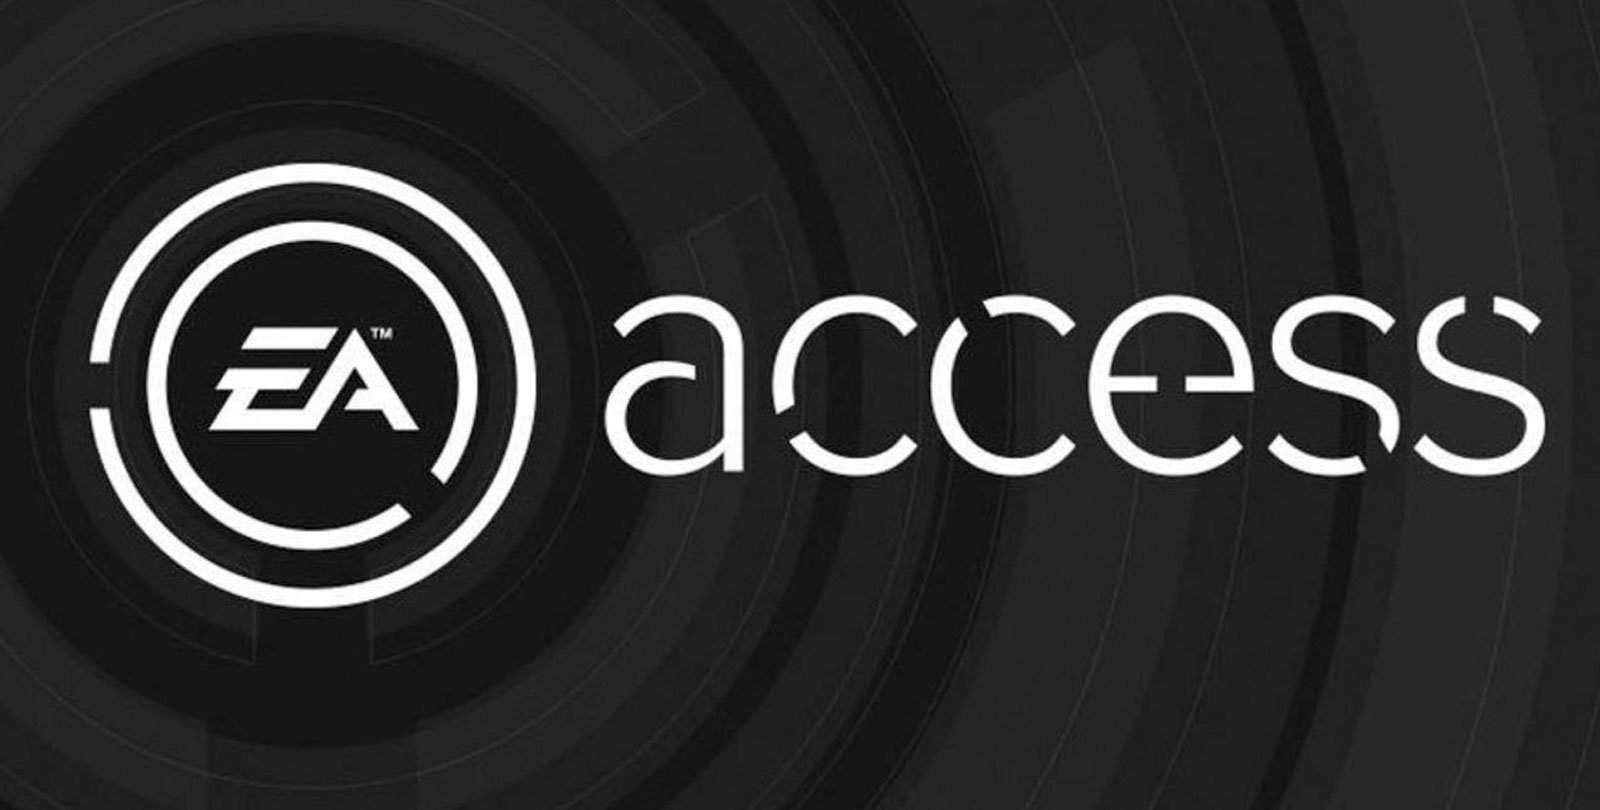 Vamers - FYI - Gaming - EA Access Subscription Gaming Service is Exclusive to Xbox One - Featured Image